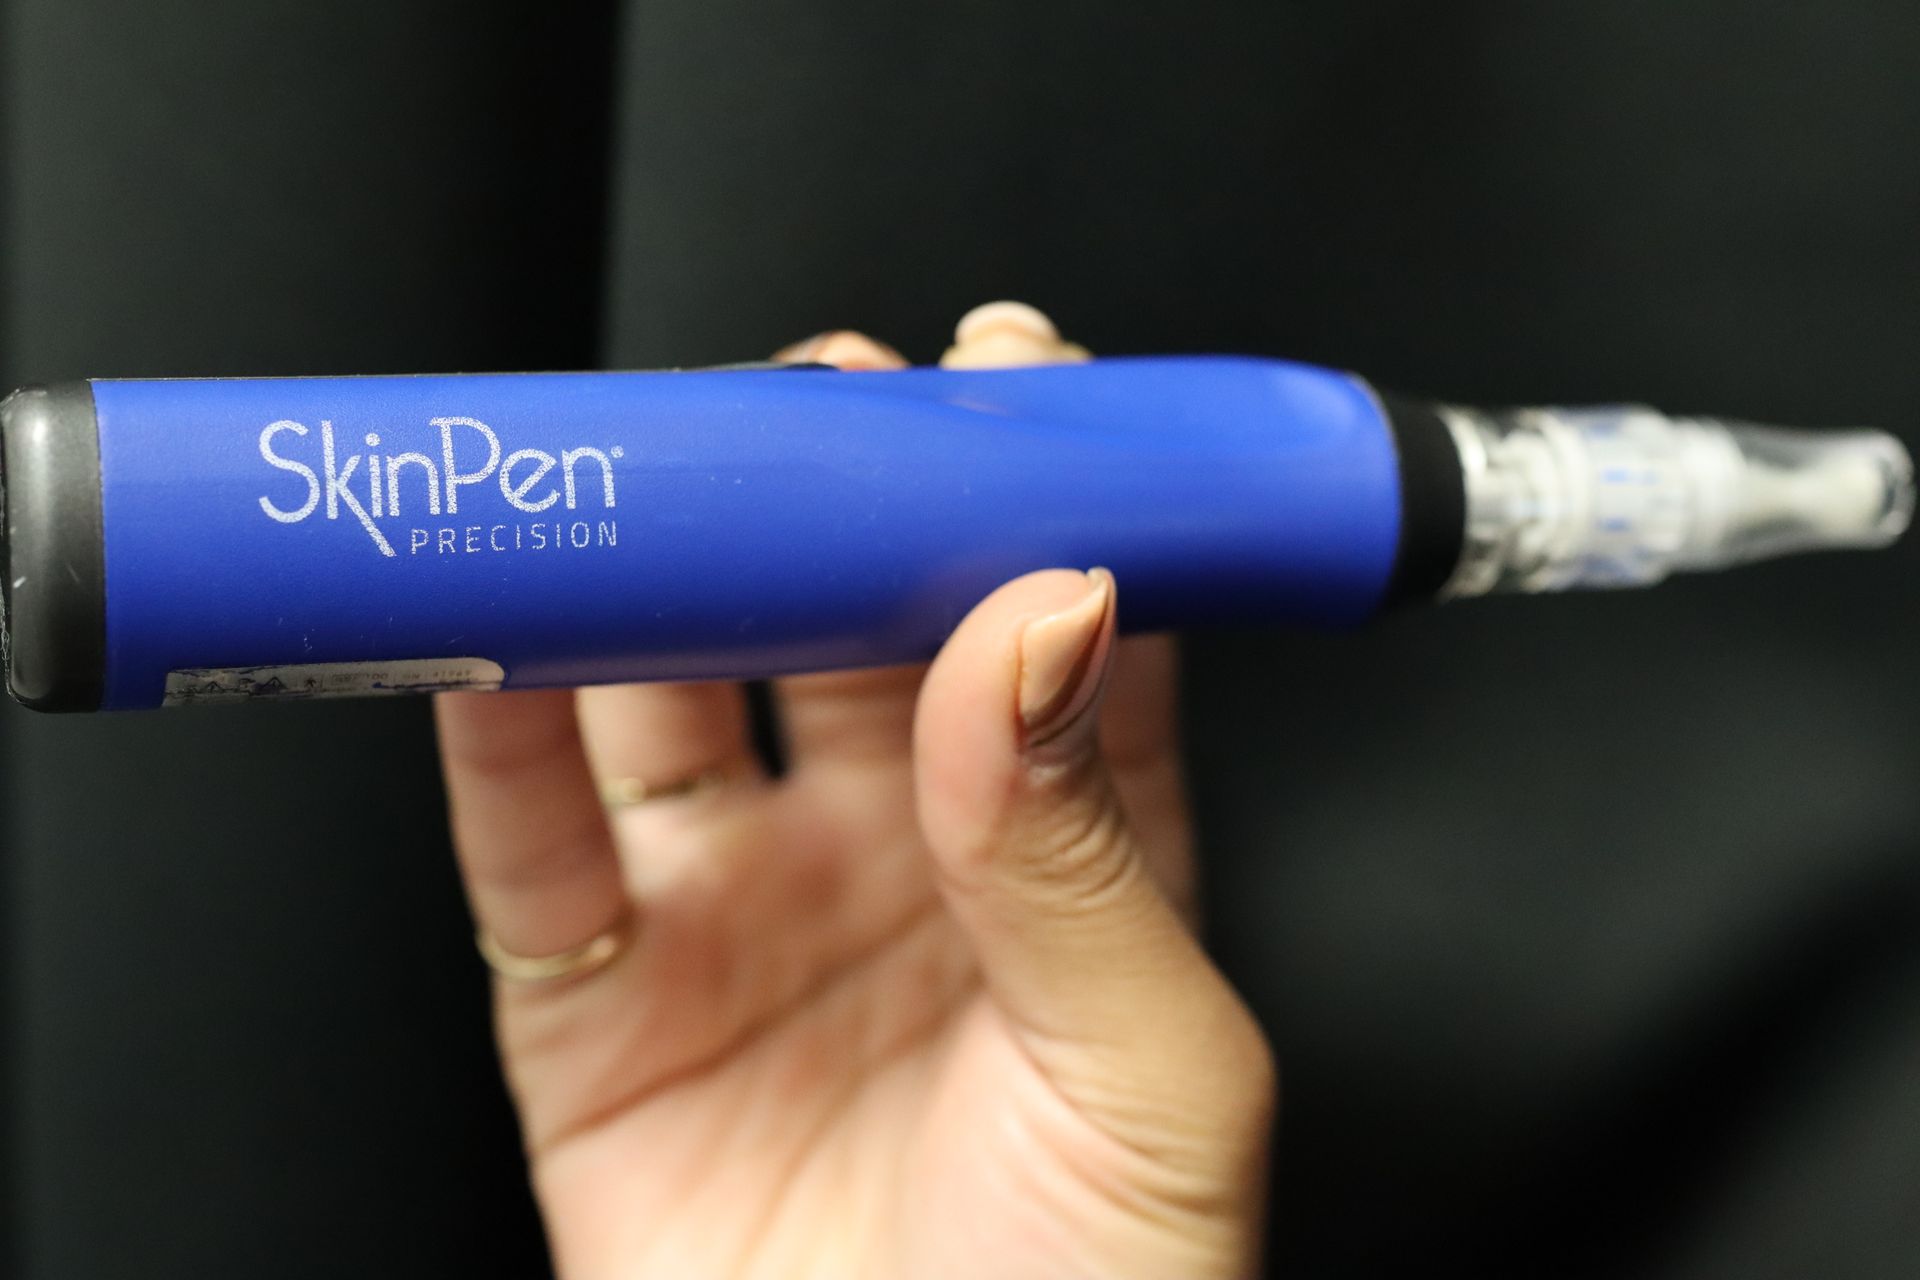 Expert SkinPen Microneedling Treatment at Windermere Medical Spa, Orlando - Advanced Collagen Induction Therapy for Radiant, Youthful Skin